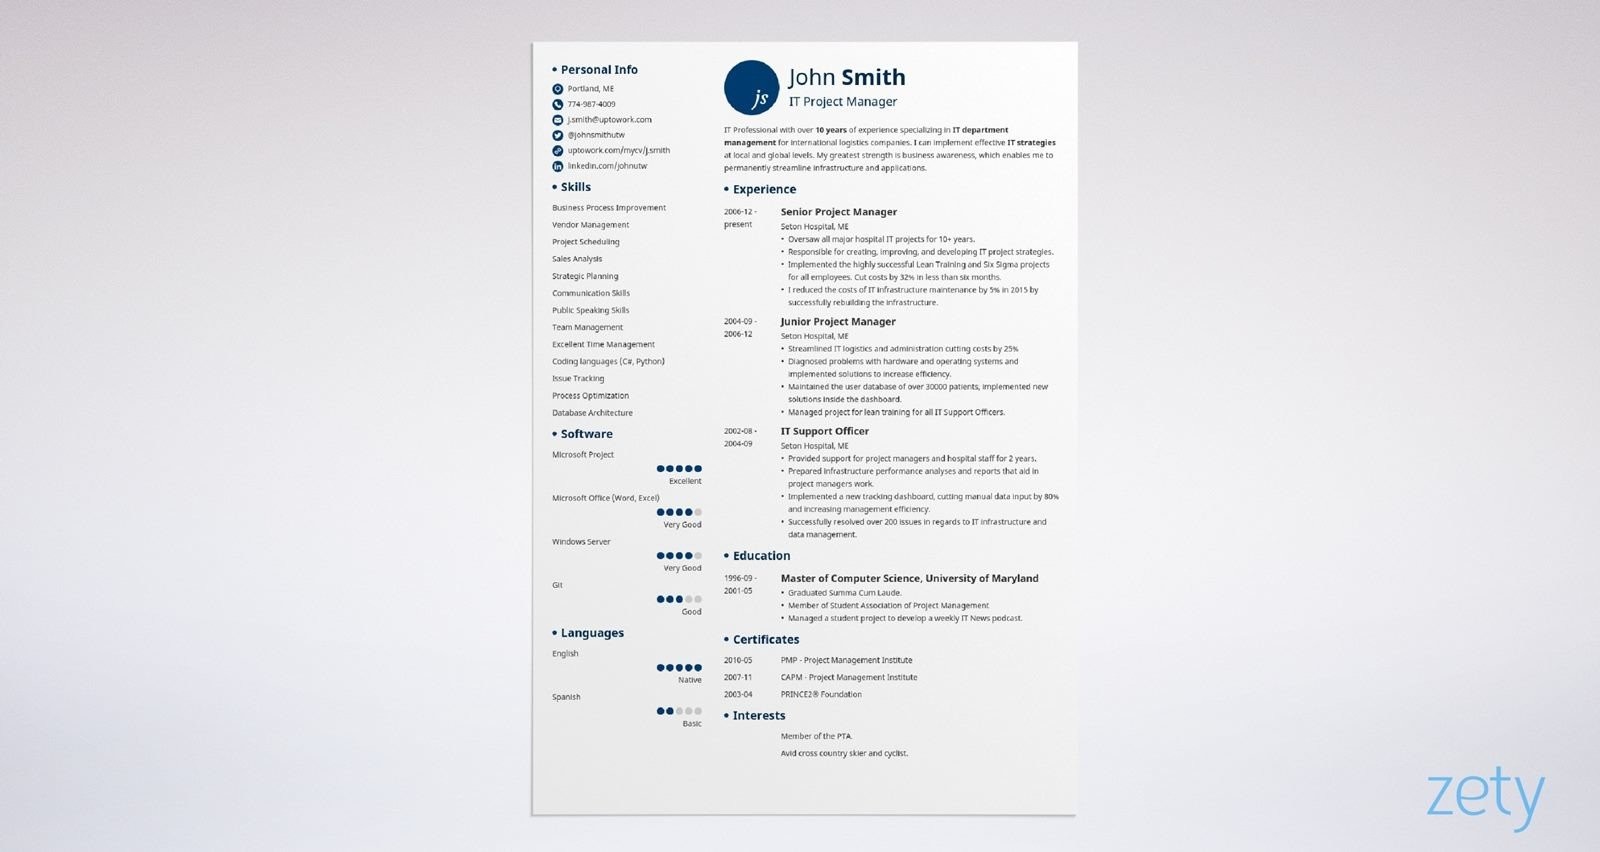 Microsoft 2007 Resume Template from cdn-images.zety.com